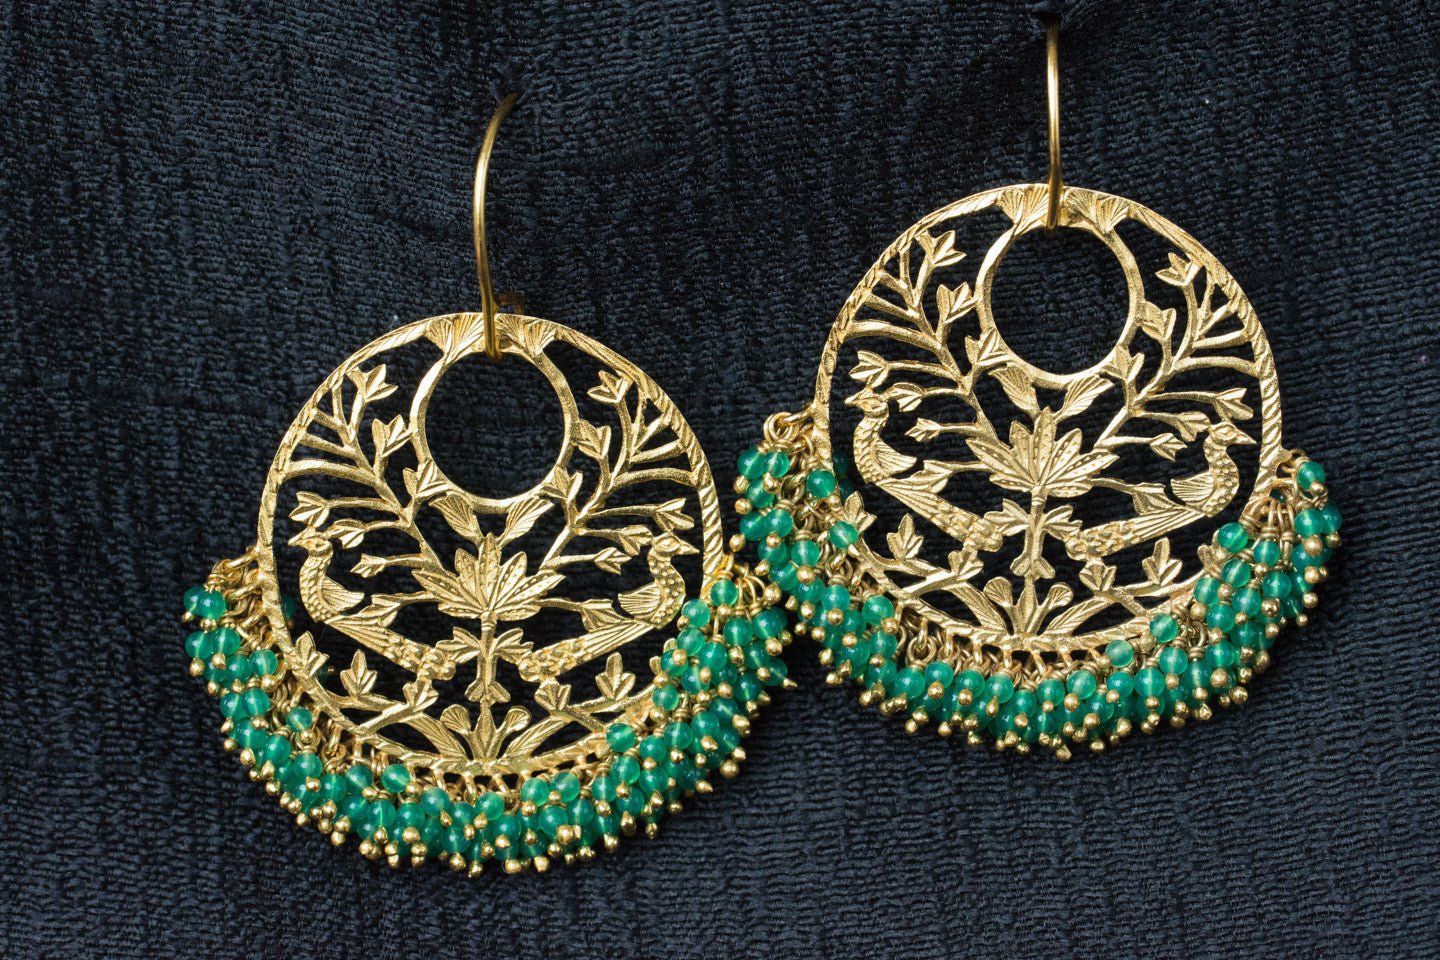 20a436-silver-gold-plated-amrapali-earrings-drop-green-onyx-beads-cut-work